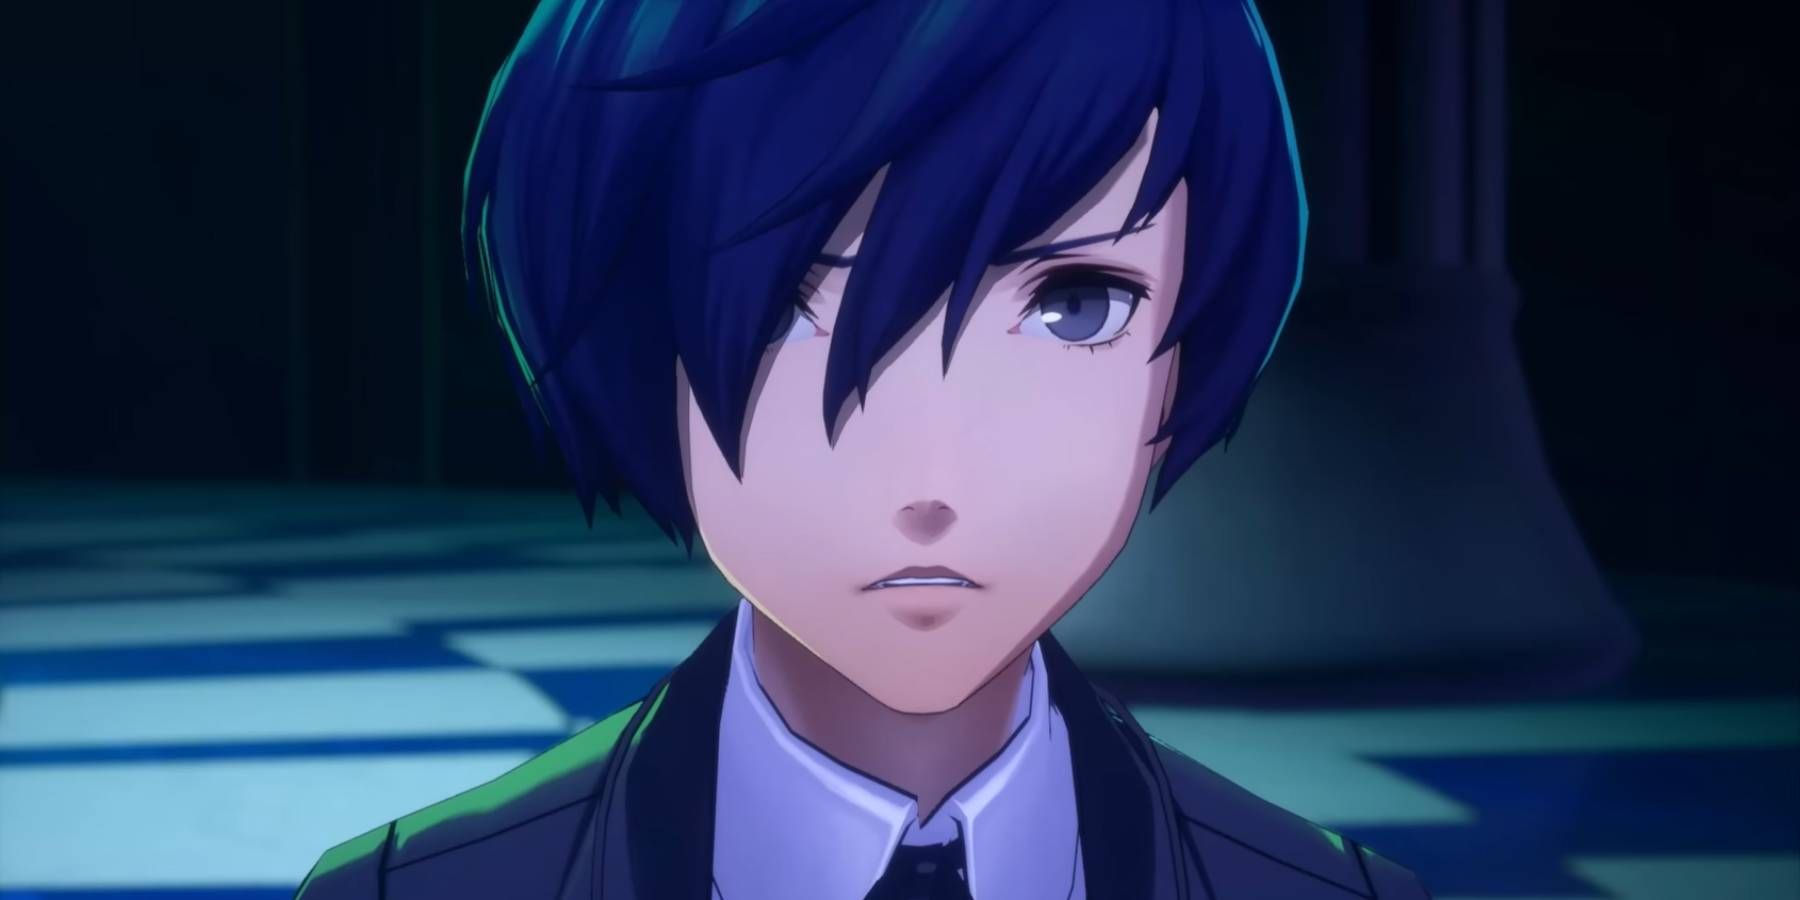 The protagonist looking mournful in a Persona 3 Reload trailer